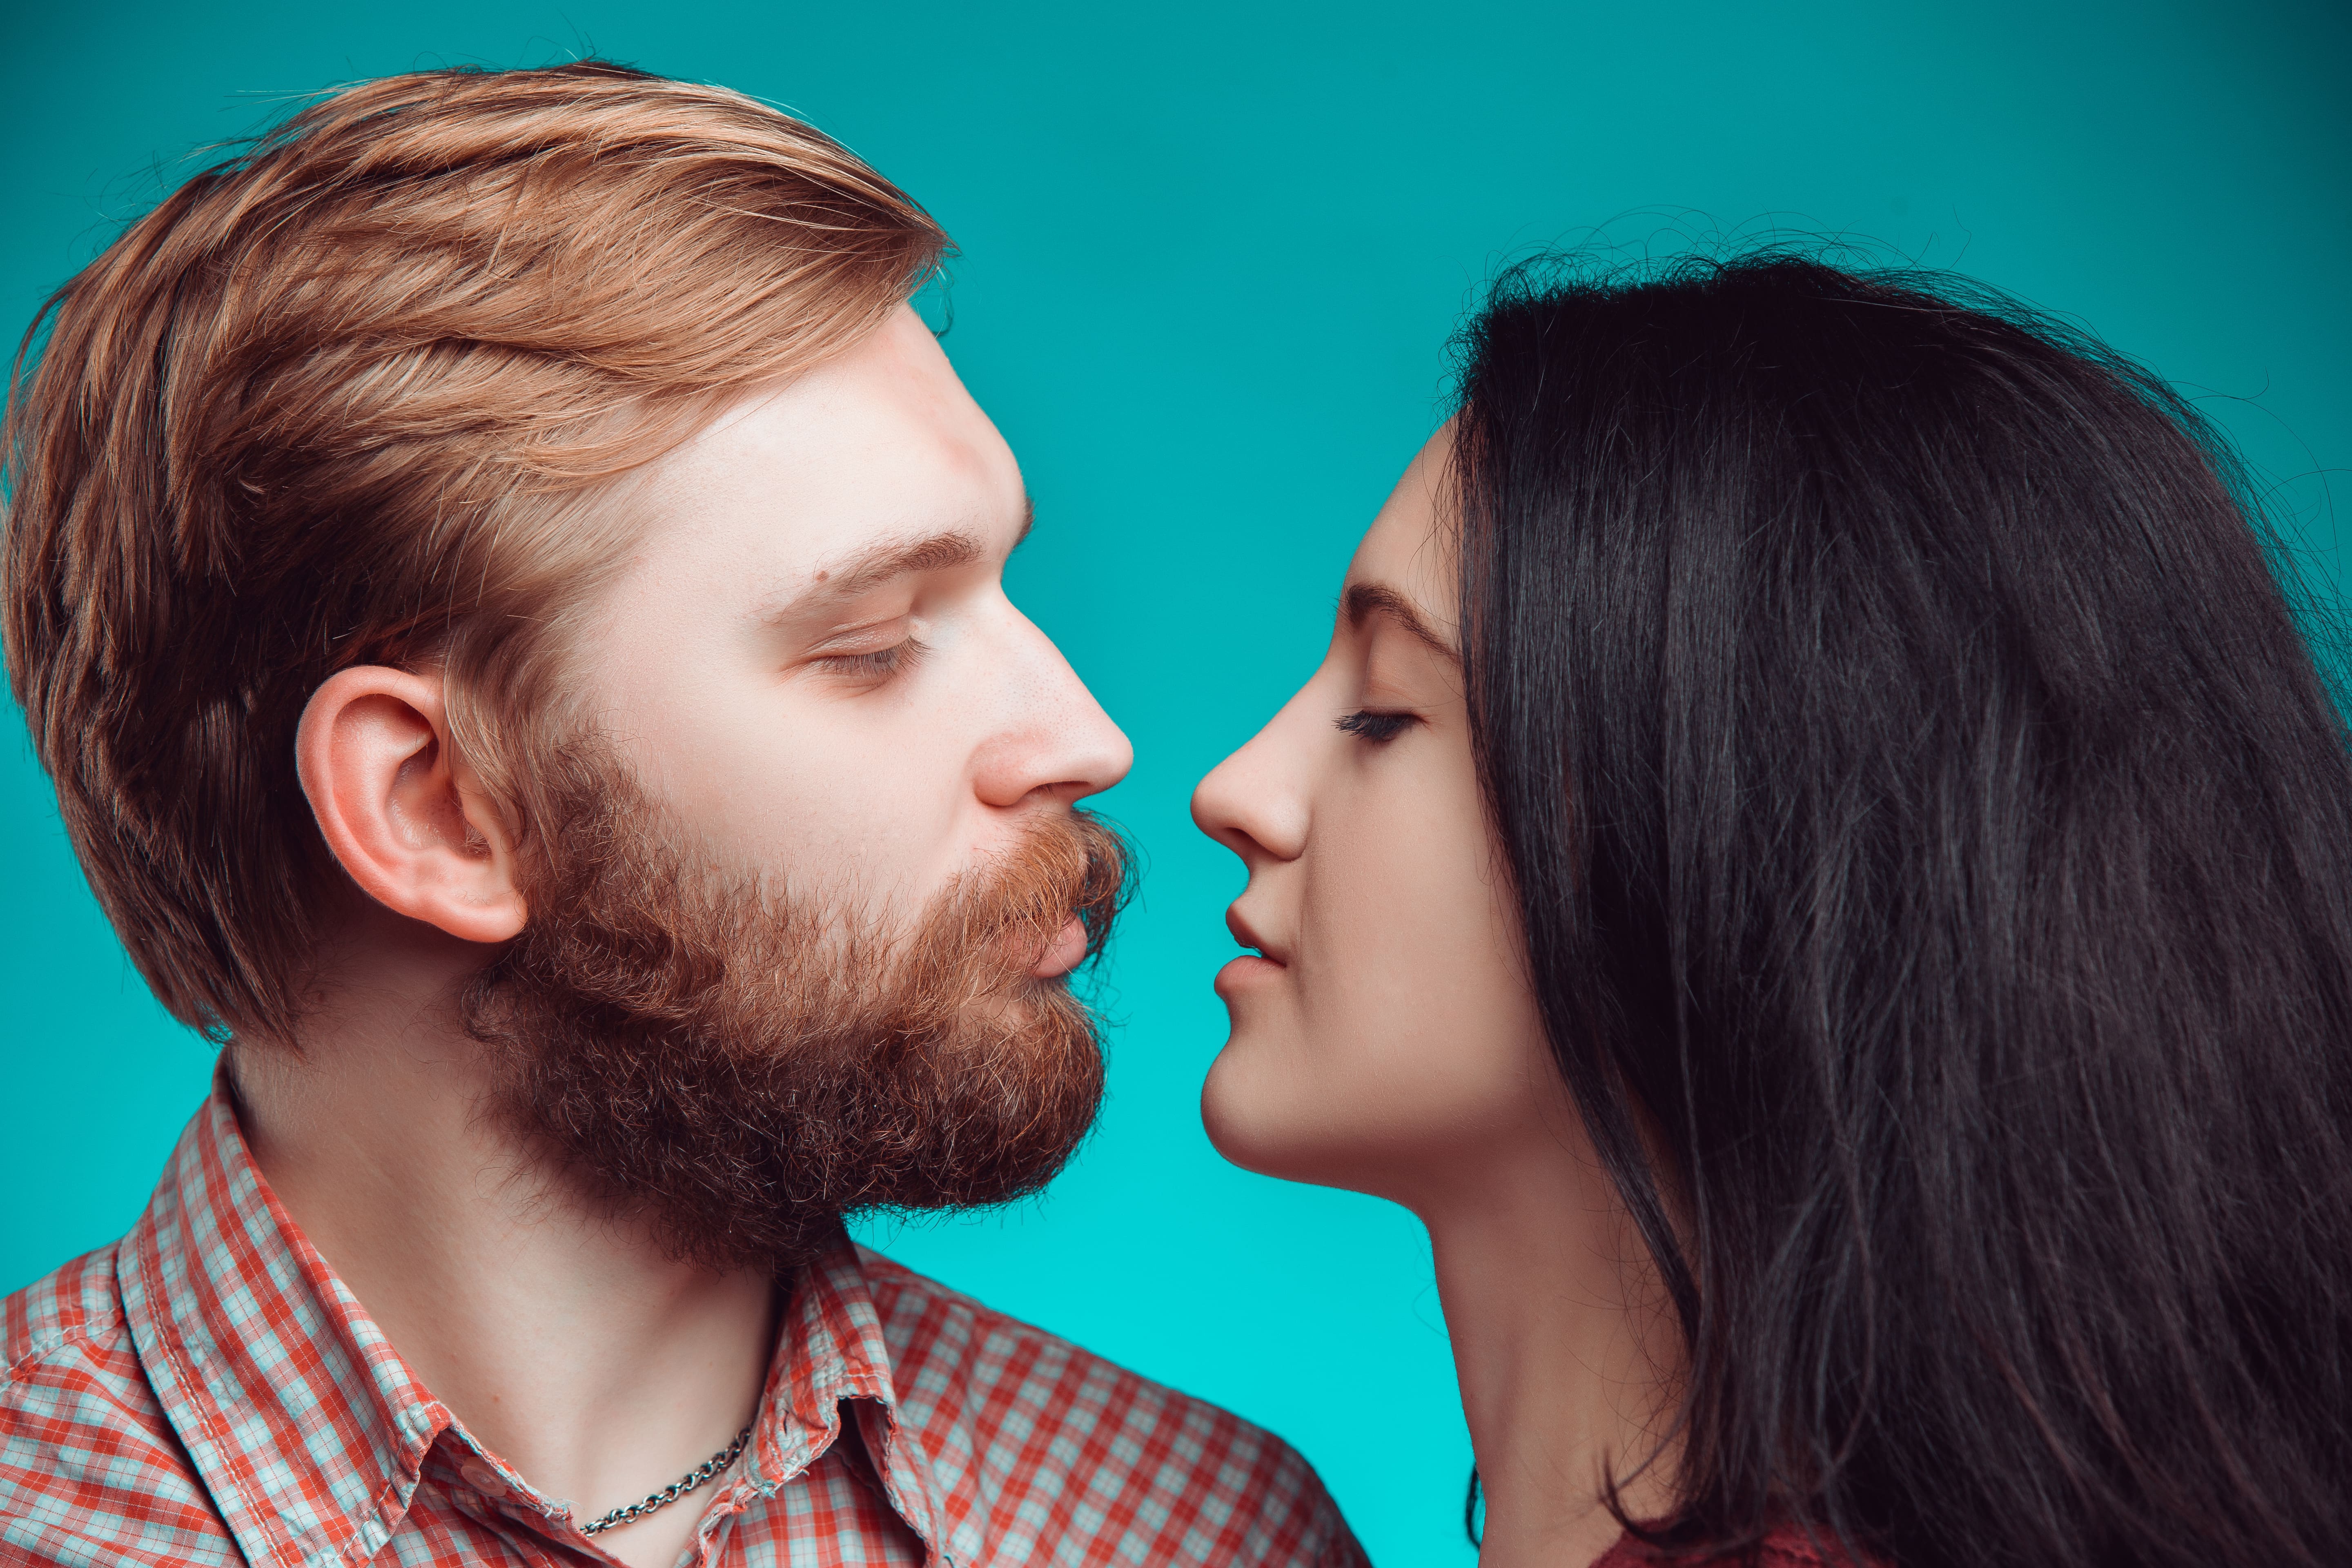 Close-up of a man and woman facing each other, noses touching, on the cusp of a kiss, set against a teal background.